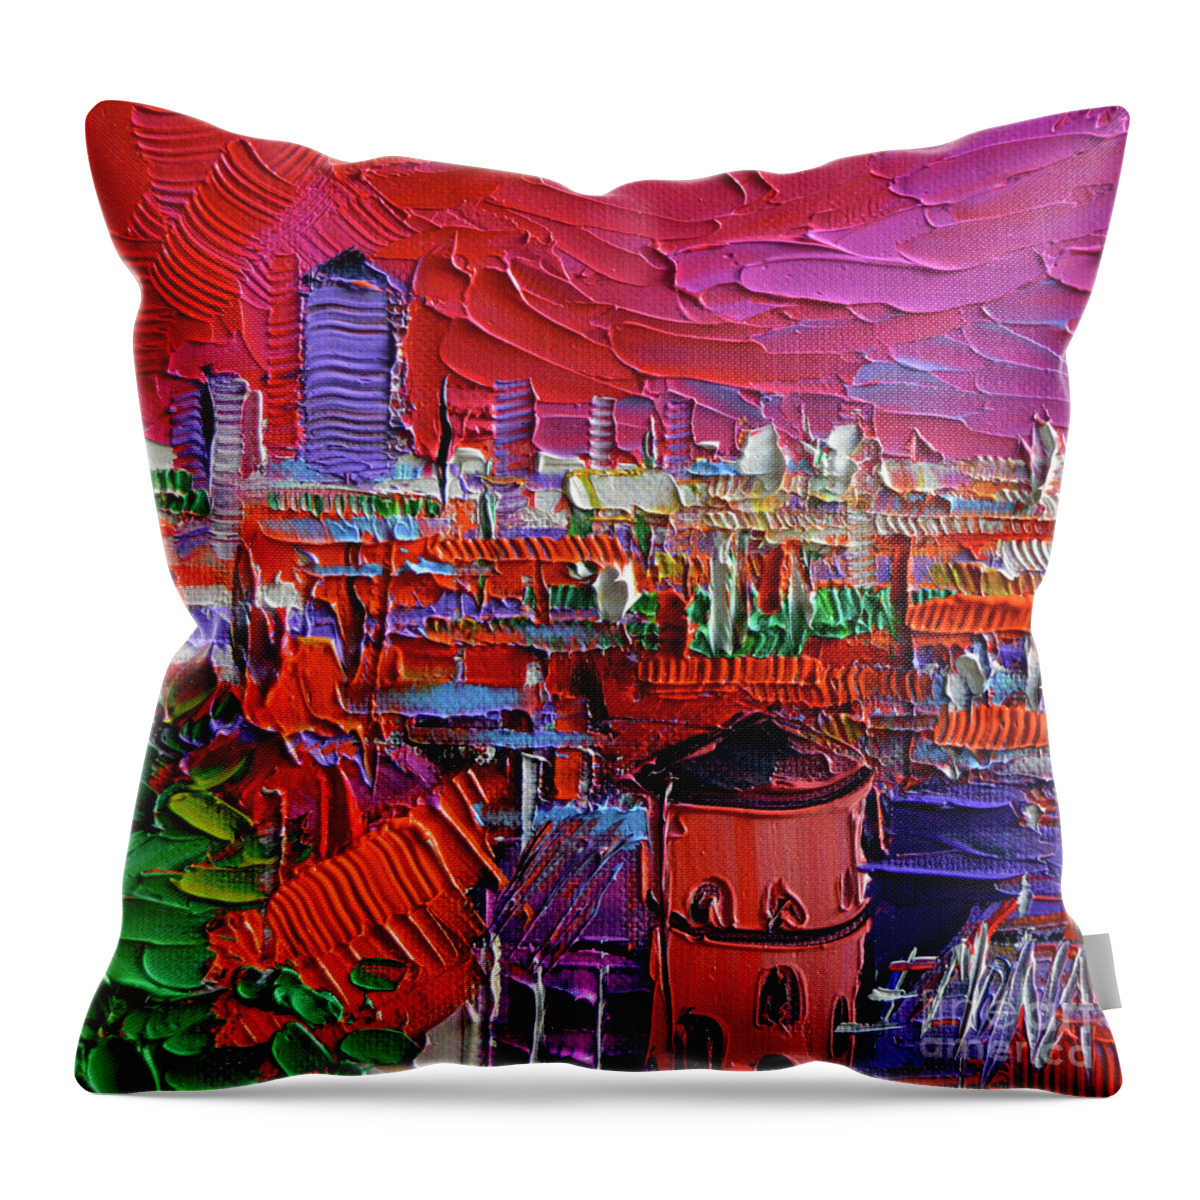 Lyon View In Pink Throw Pillow featuring the painting Lyon View In Pink by Mona Edulesco